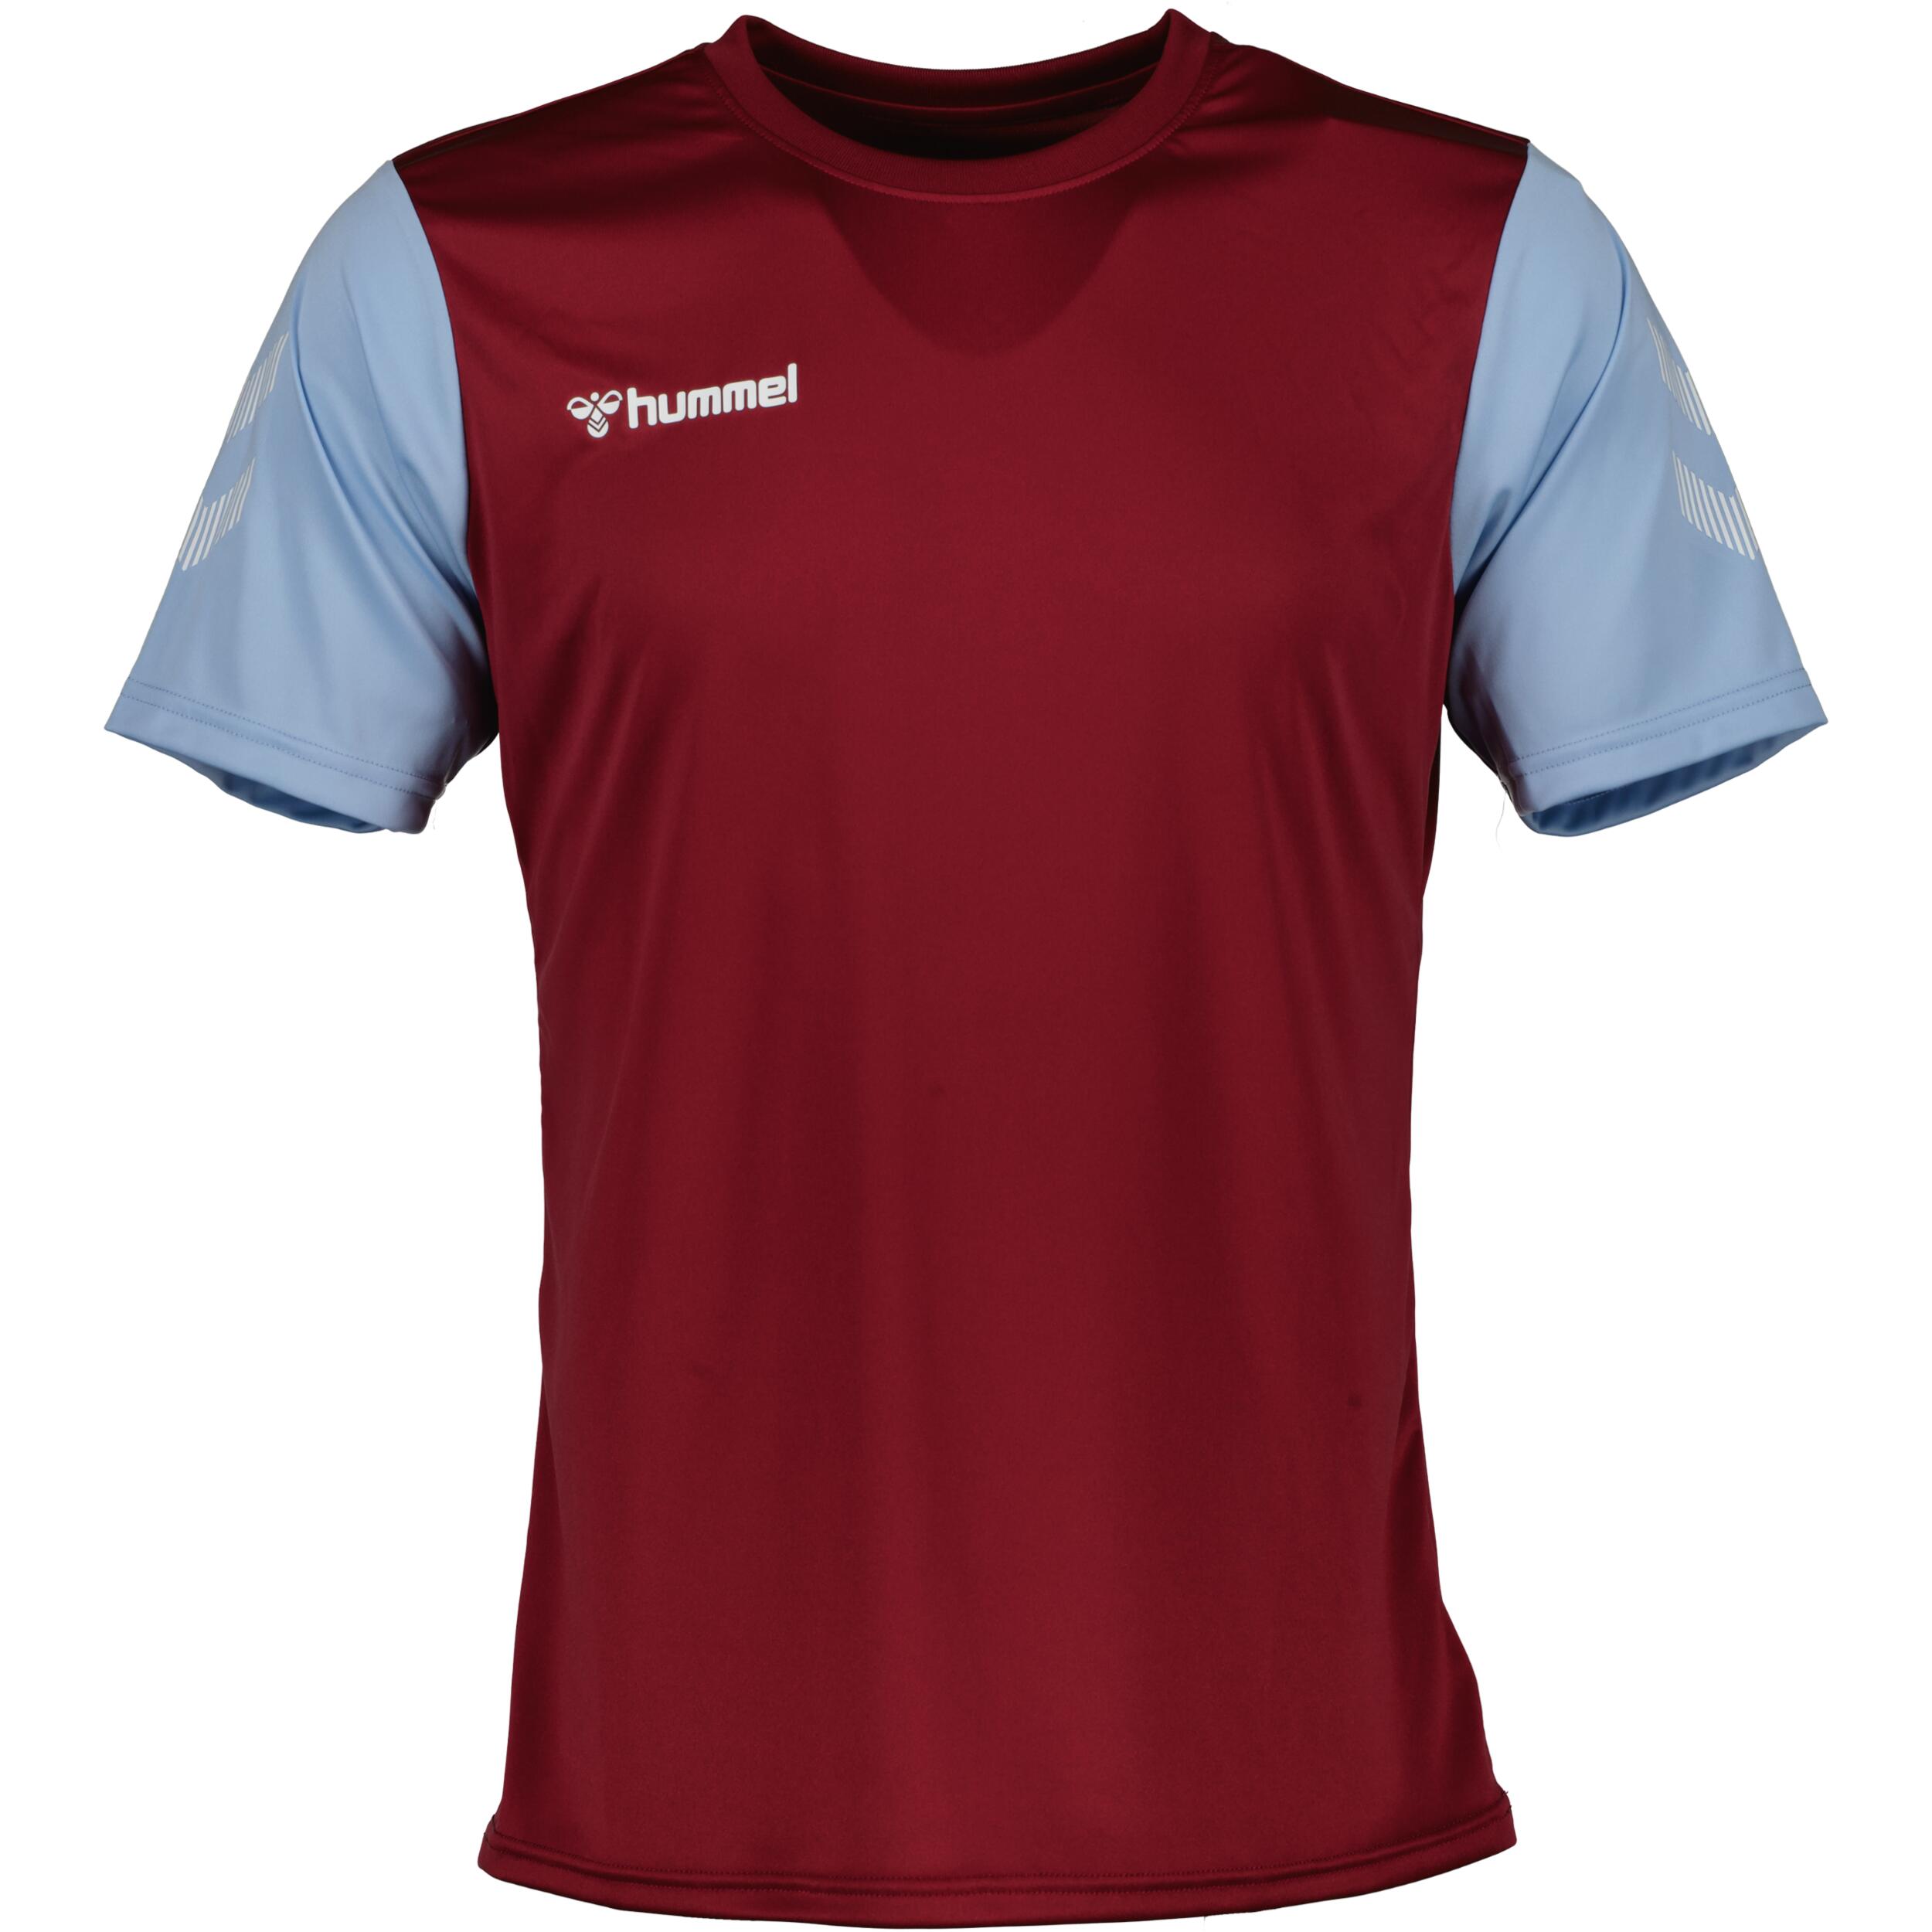 Match jersey for kids, great for football, in maroon/argentina blue 1/3